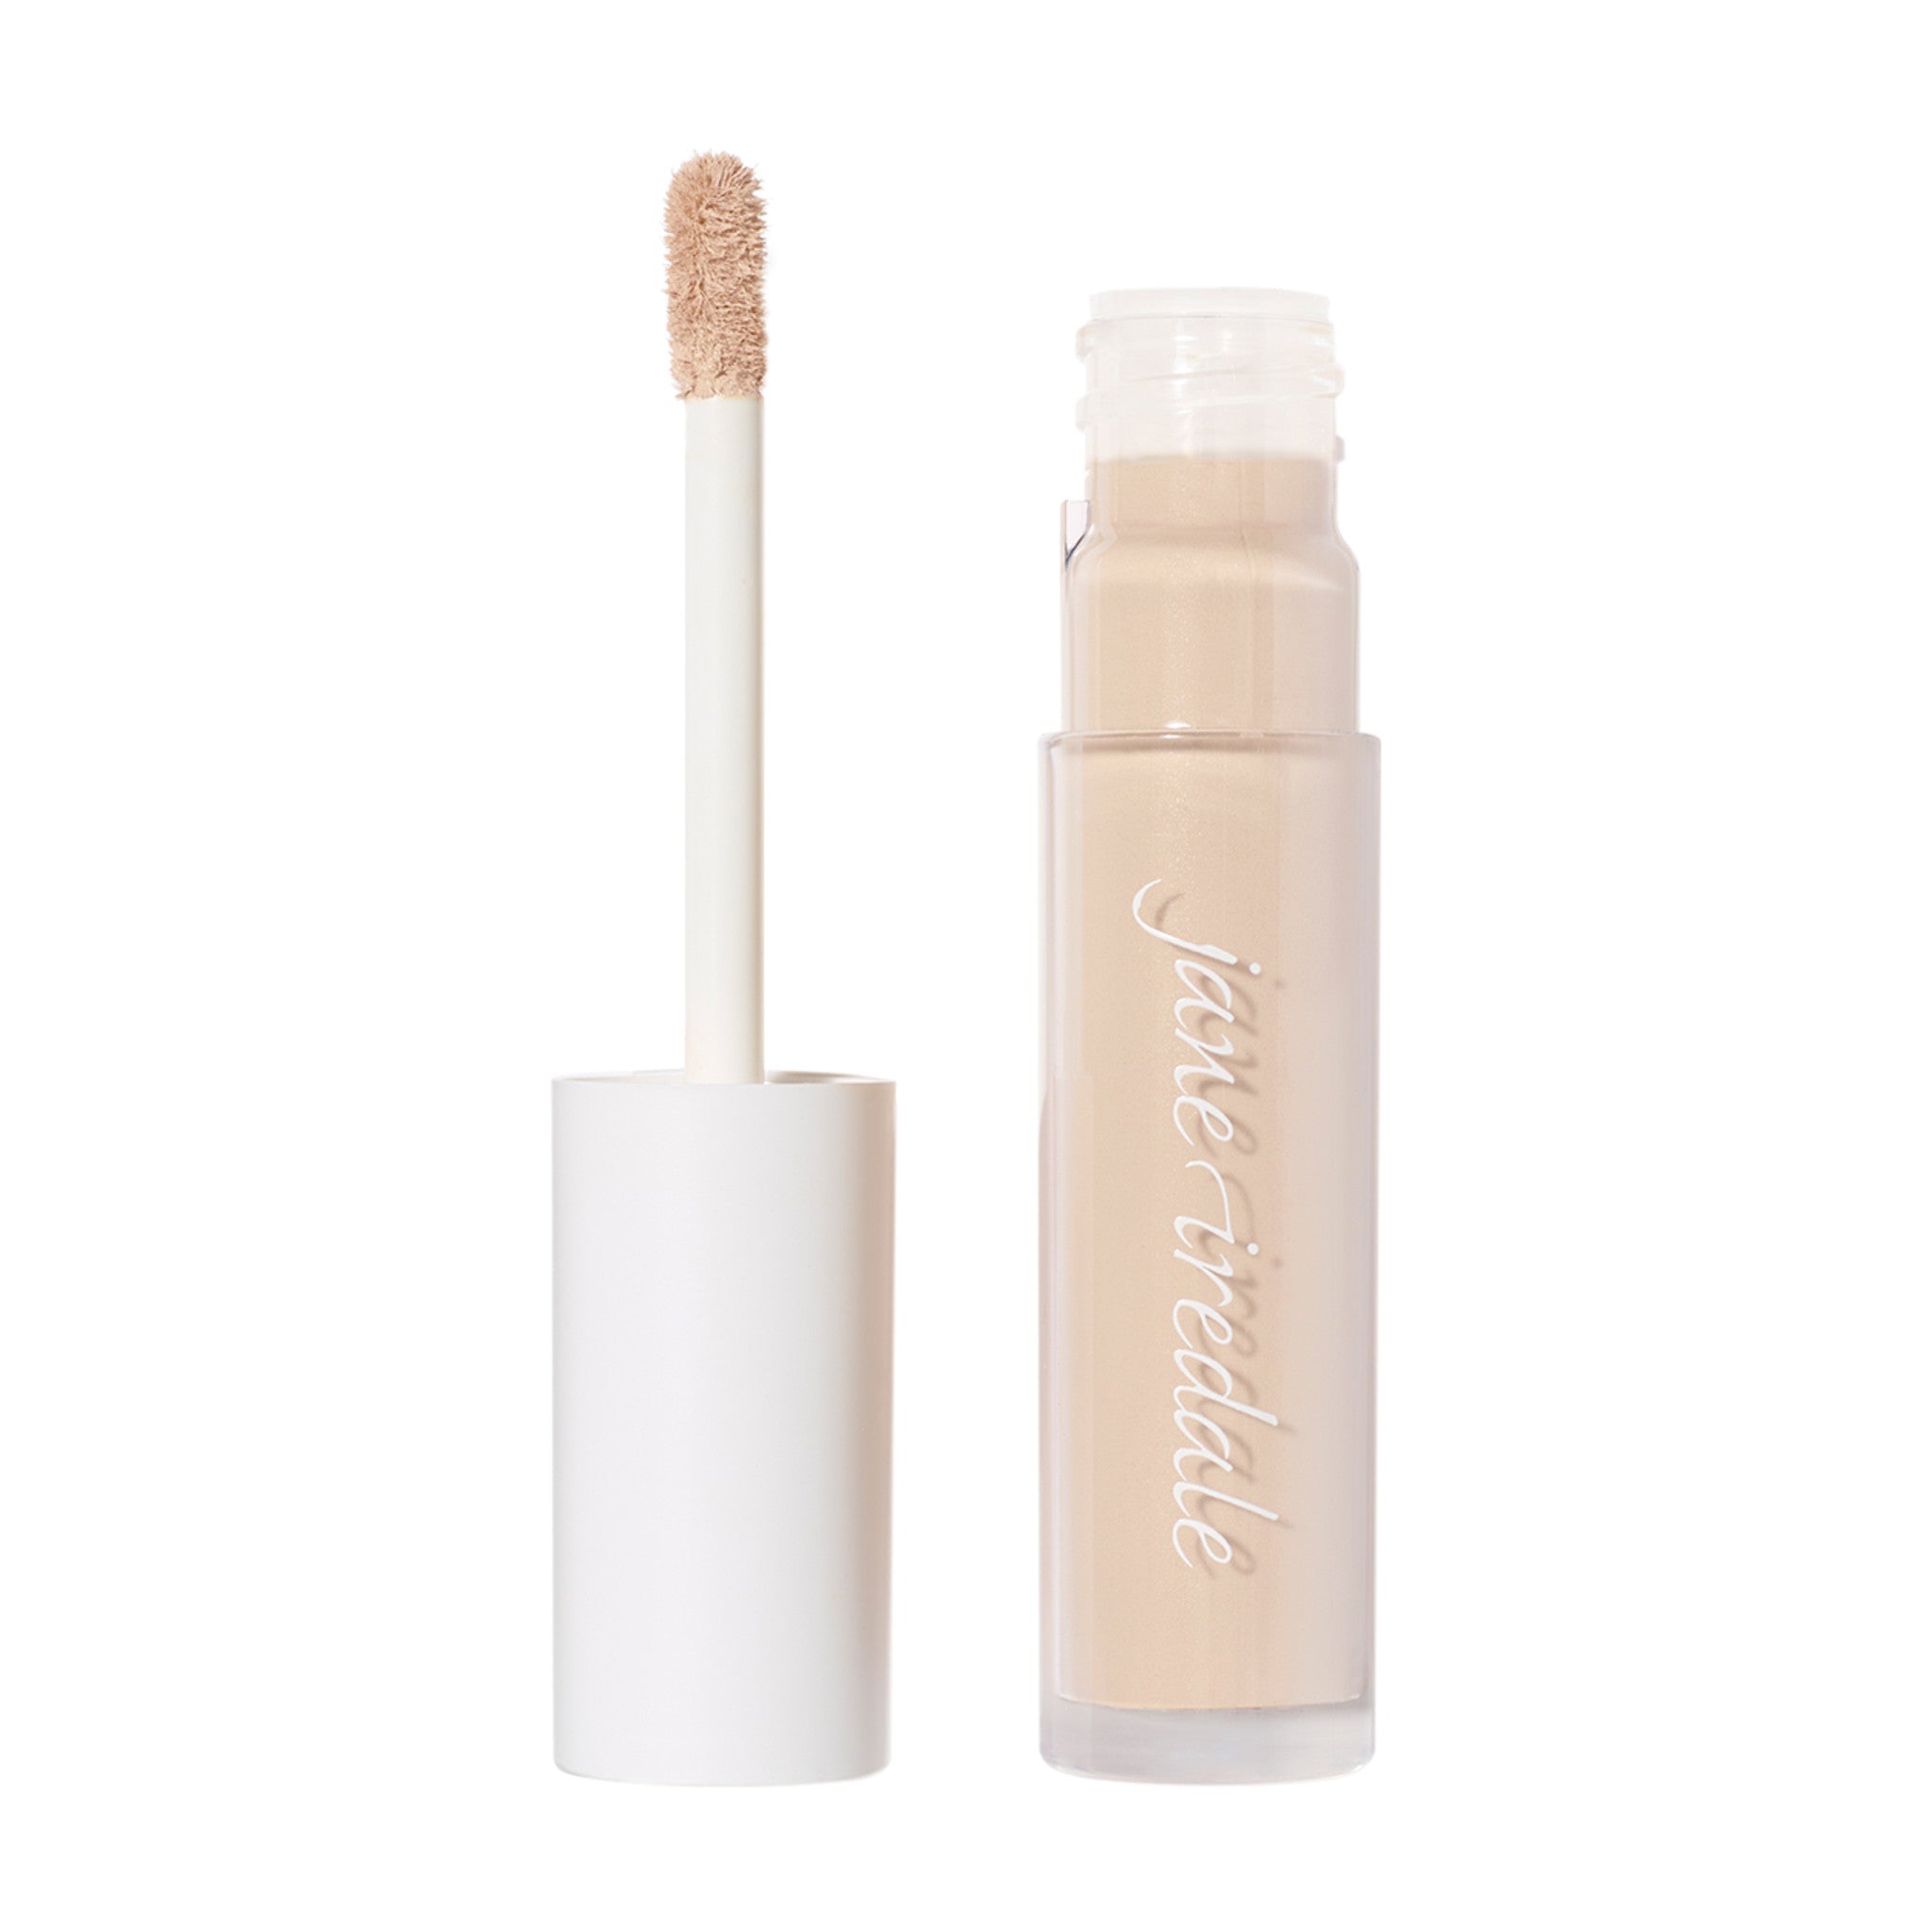 Jane Iredale PureMatch Liquid Concealer Color/Shade variant: 2N main image. This product is in the color nude